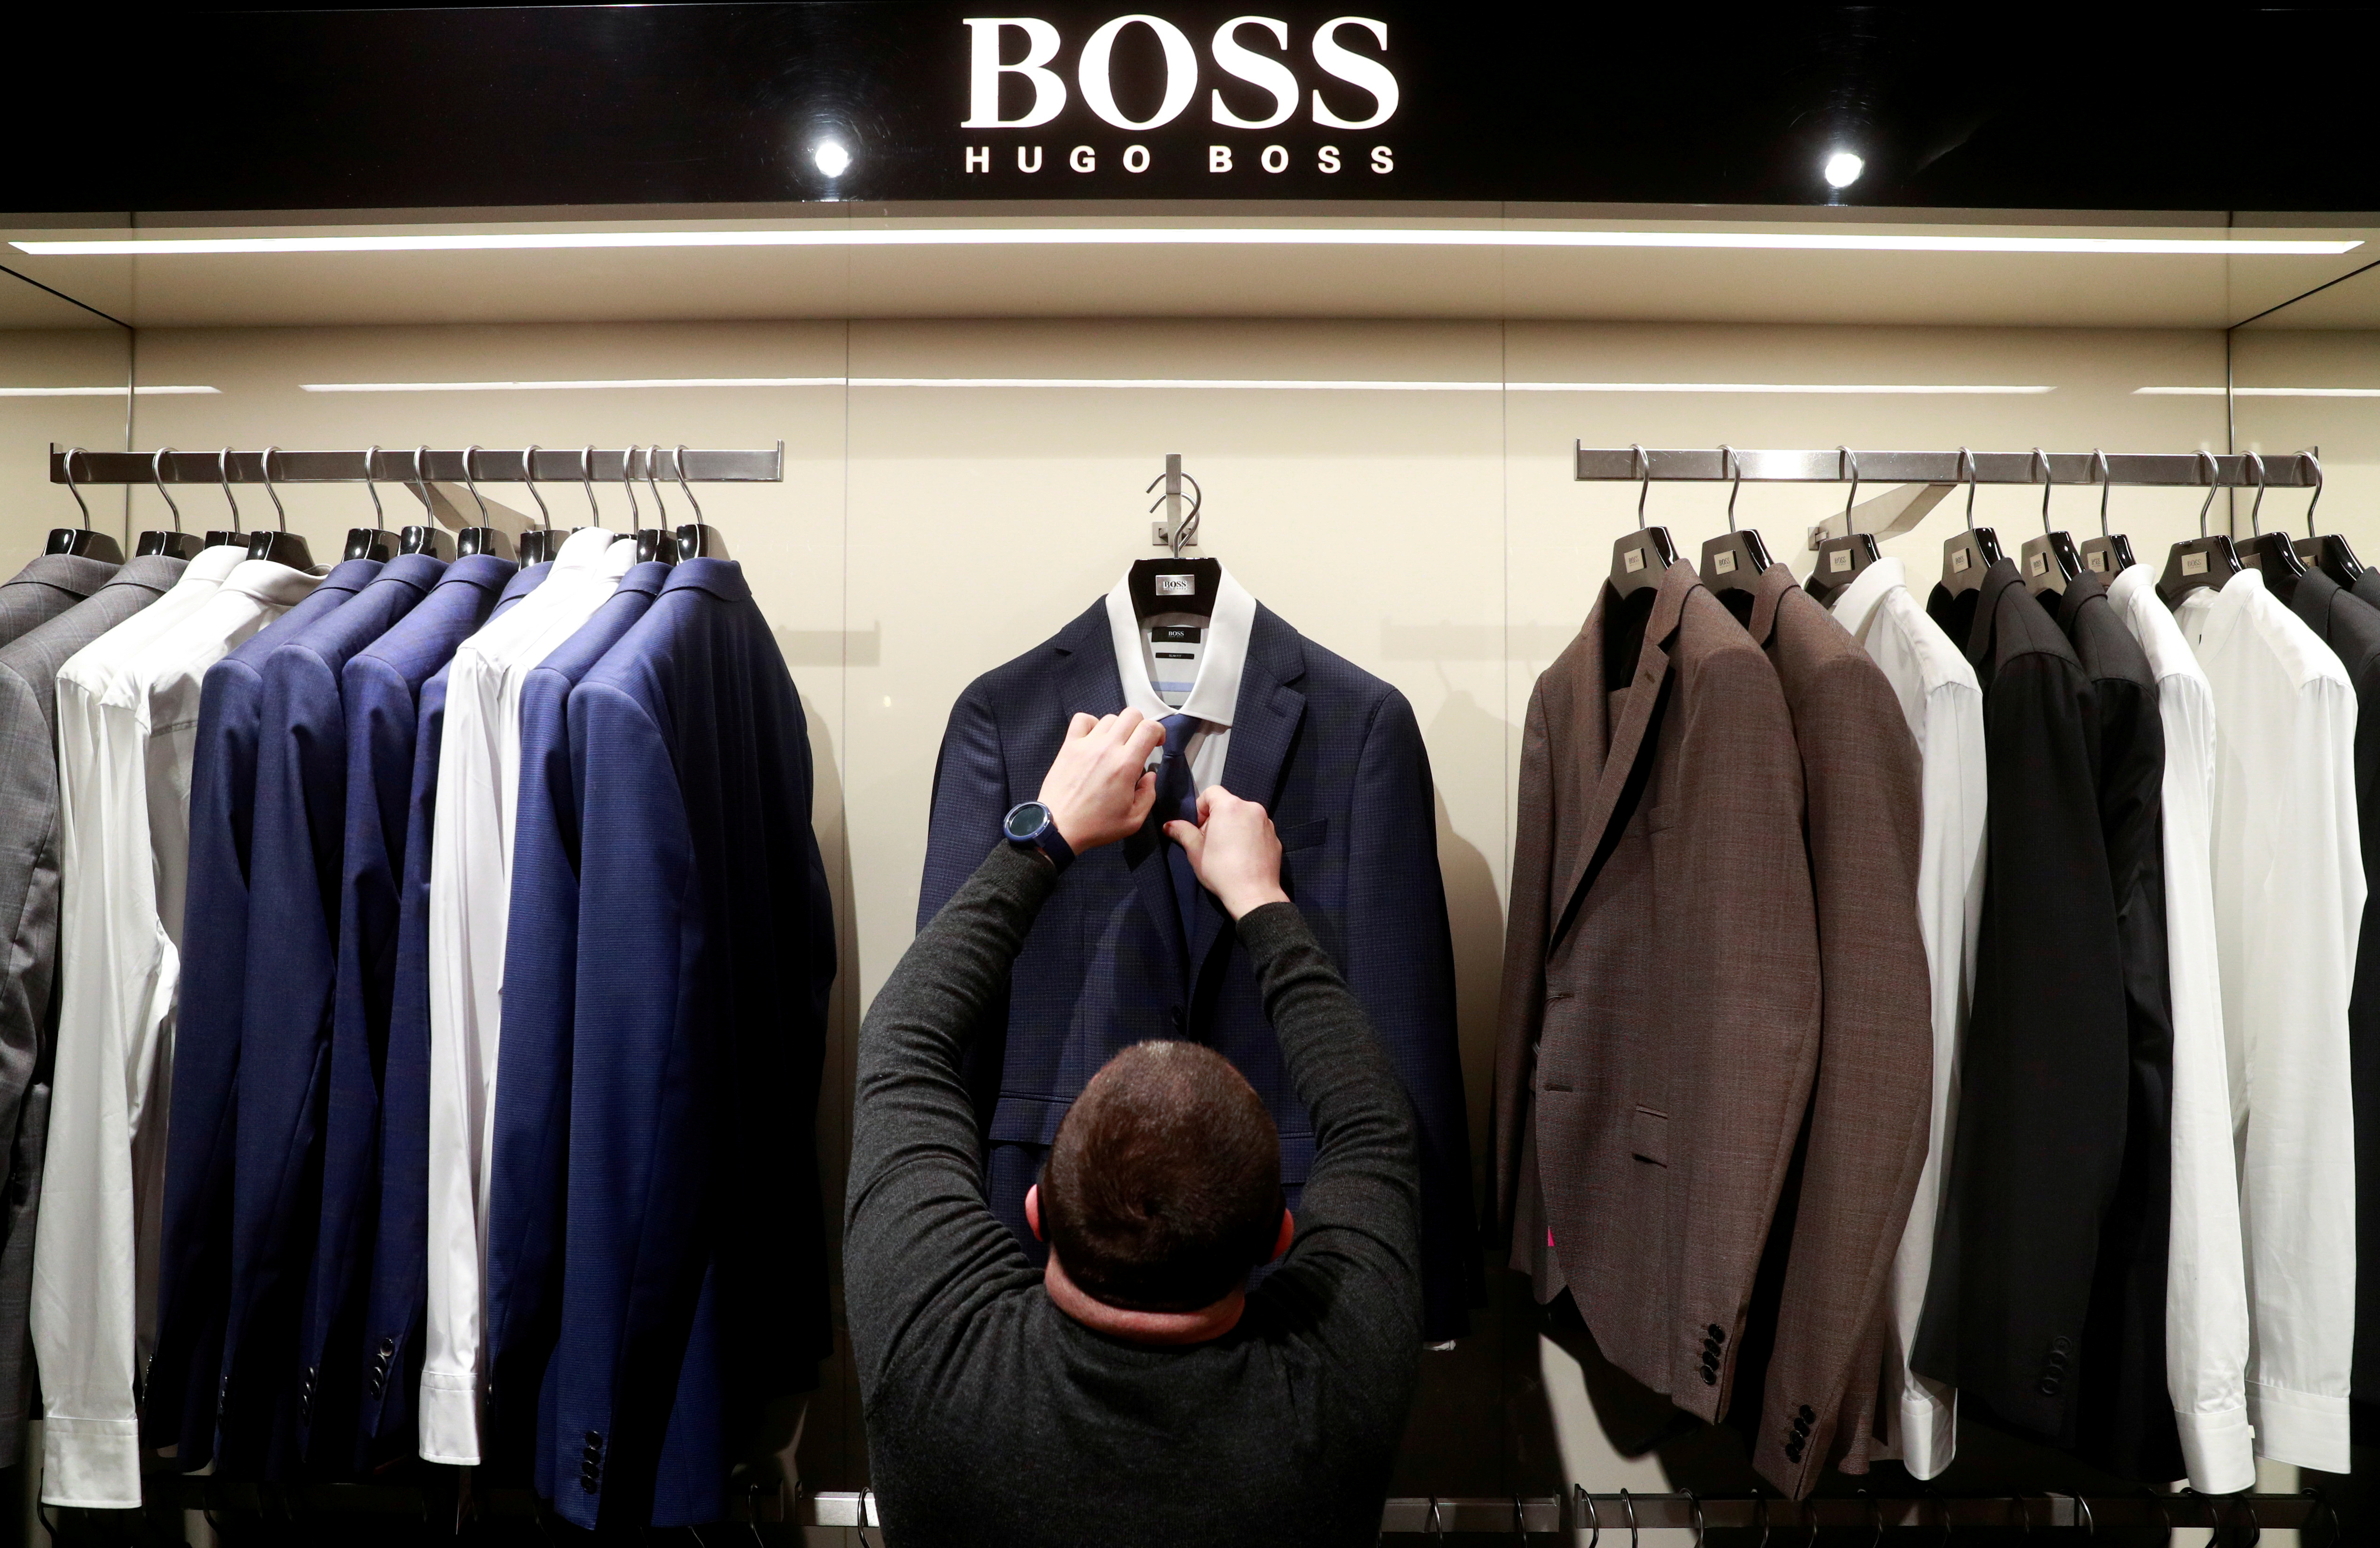 Hugo Boss At Shop, 54% OFF | www.ilpungolo.org